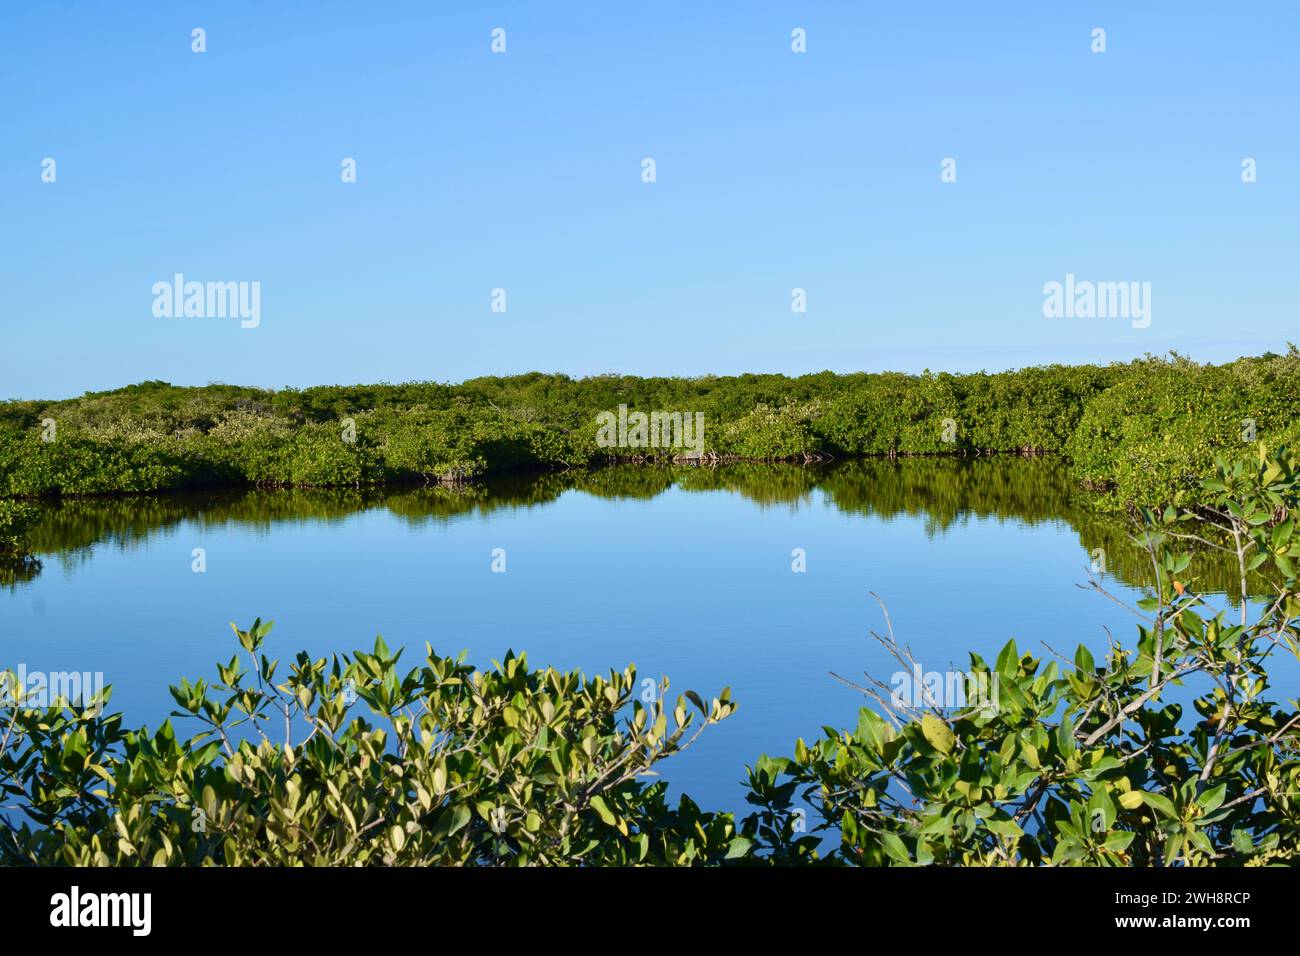 A view of the mangrove in San Pedro, Ambergris caye, Belize, Central America. Stock Photo